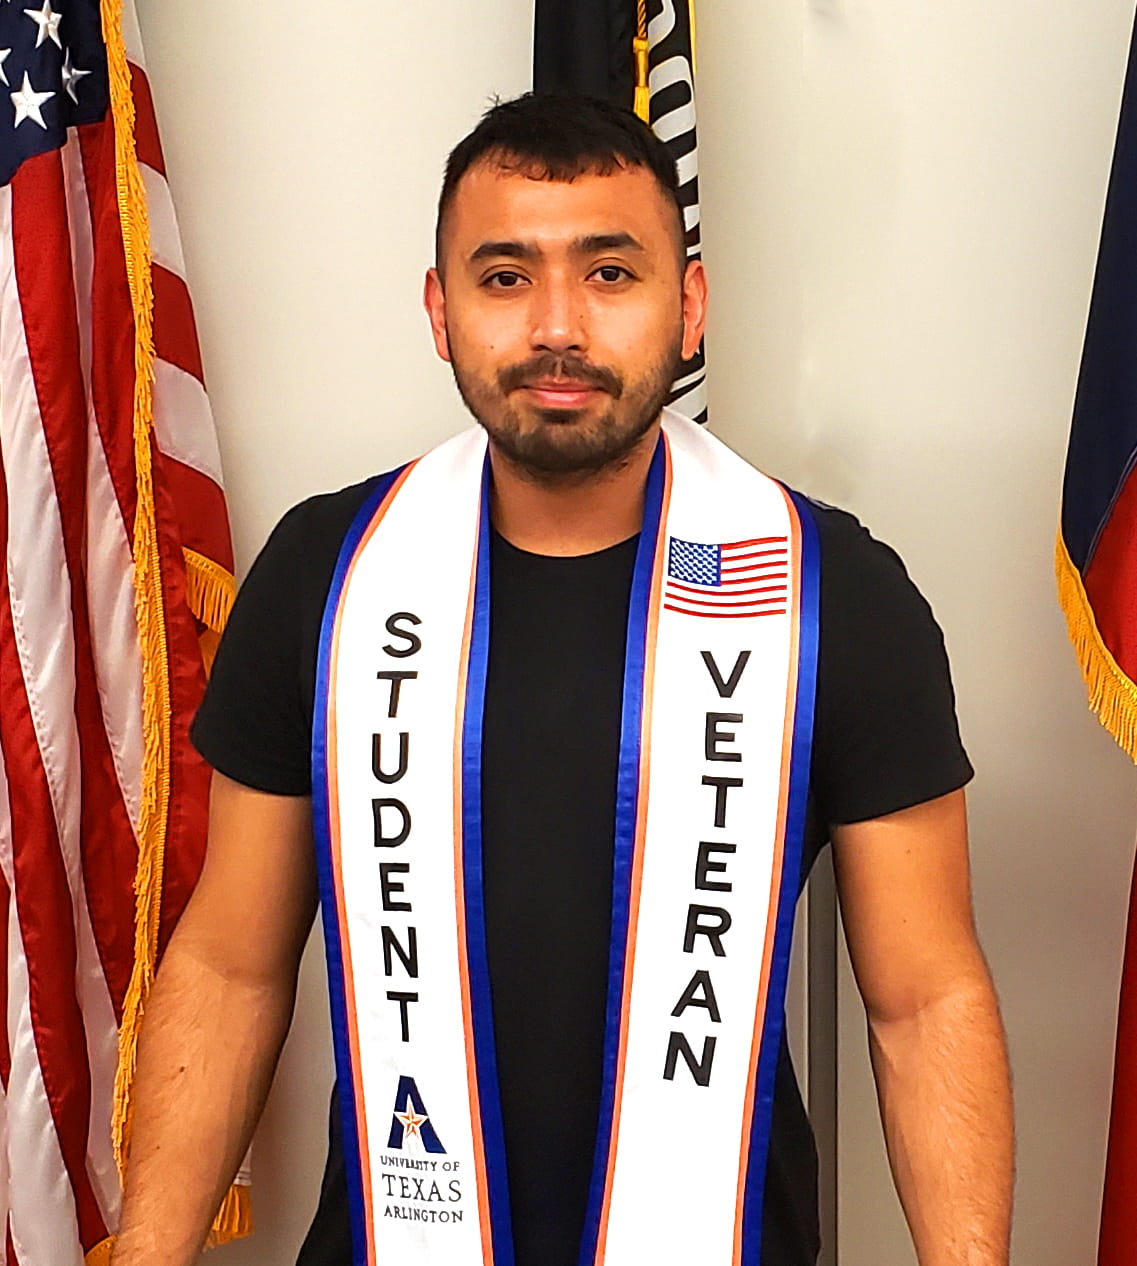 Student wearing a graduation stole that says "Student Veteran" on it. 